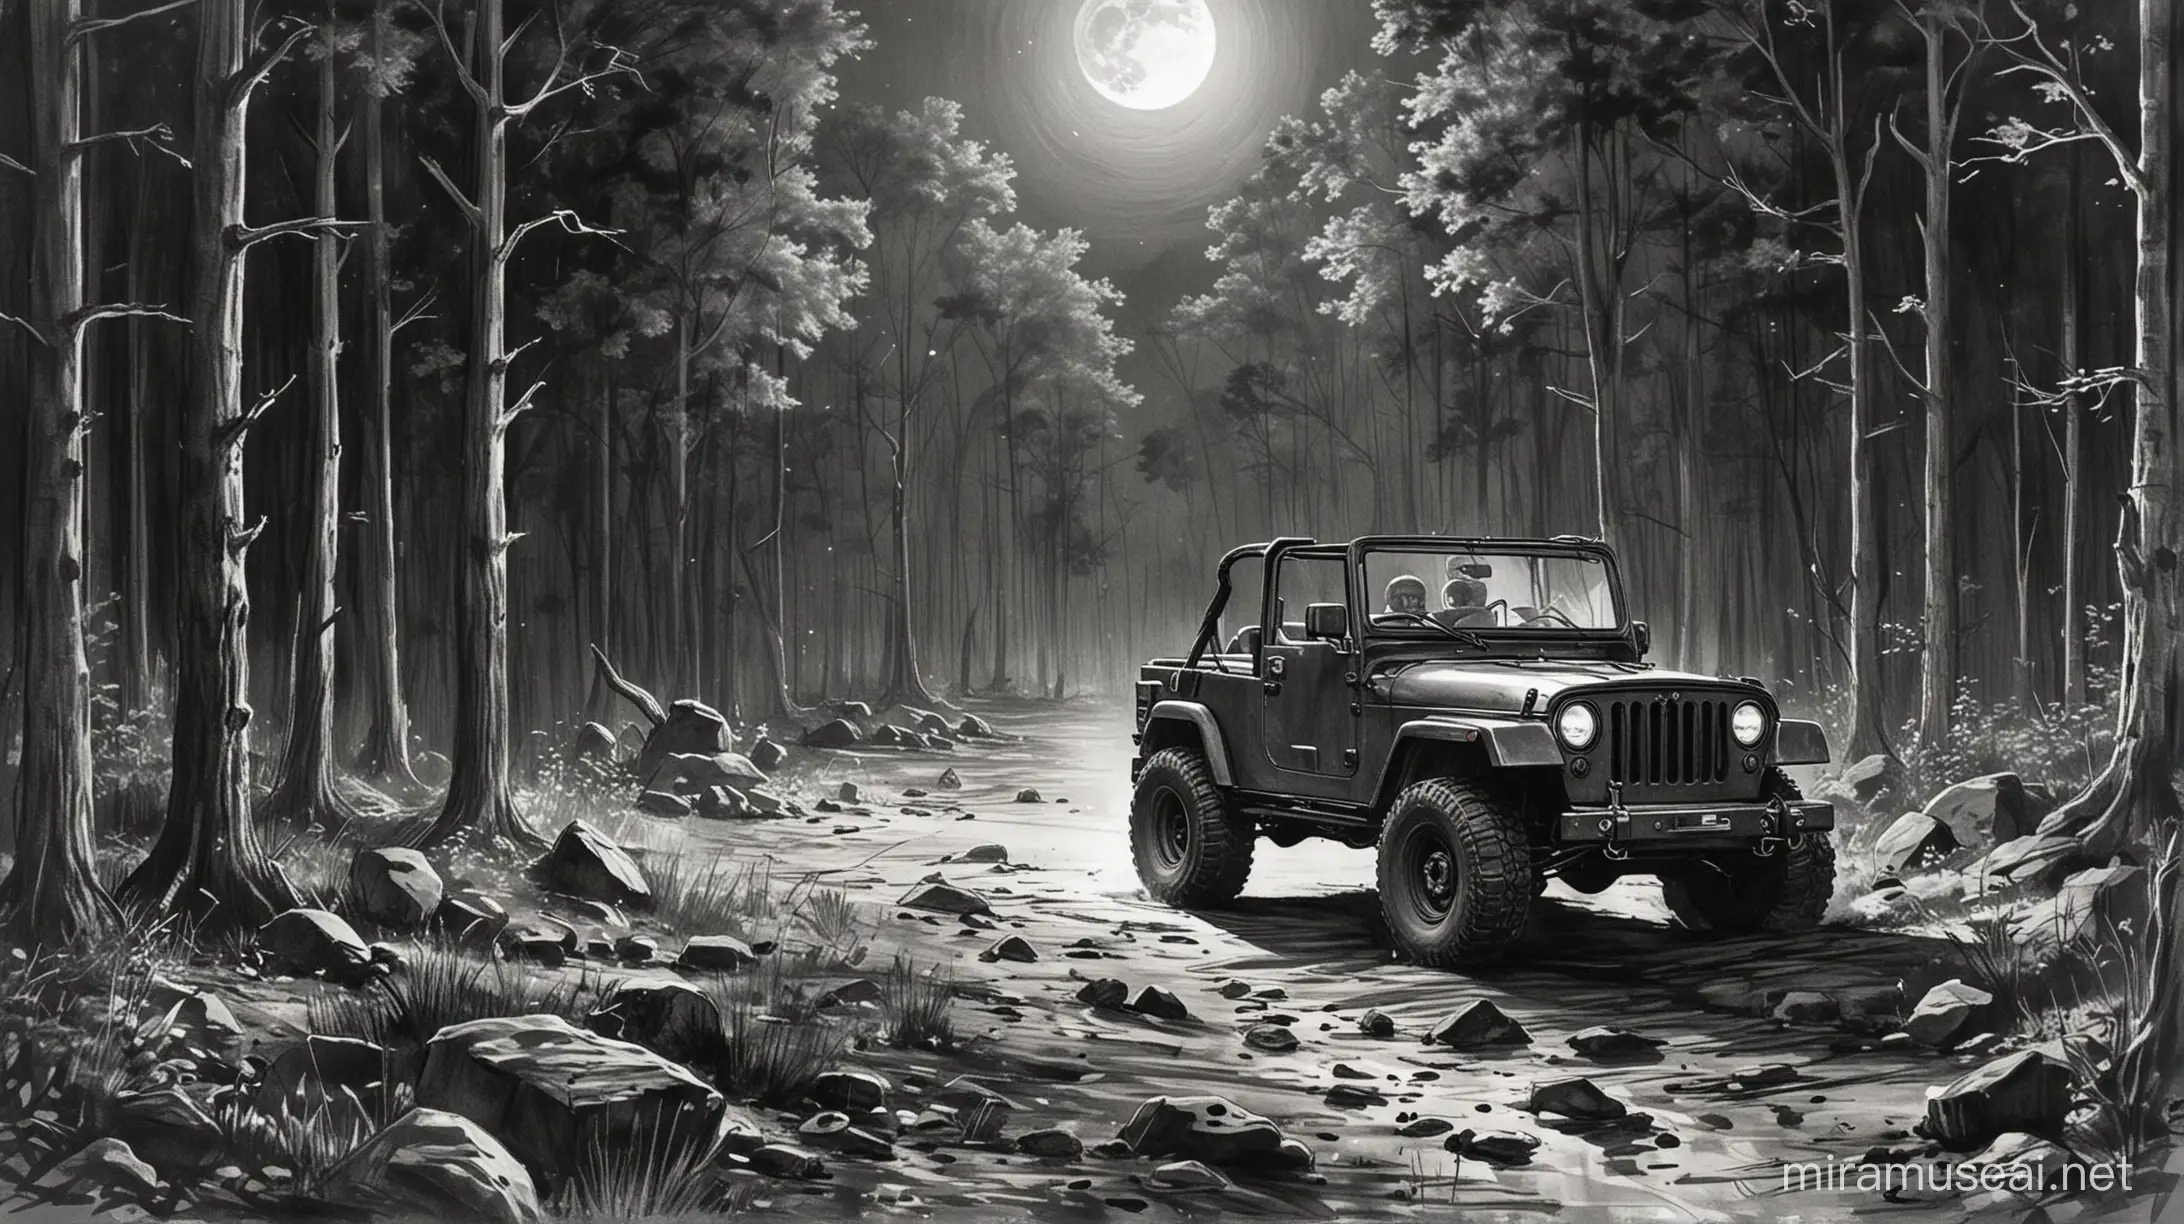 Nighttime Jeep Fight in Indian Forest Moonlight Sketch